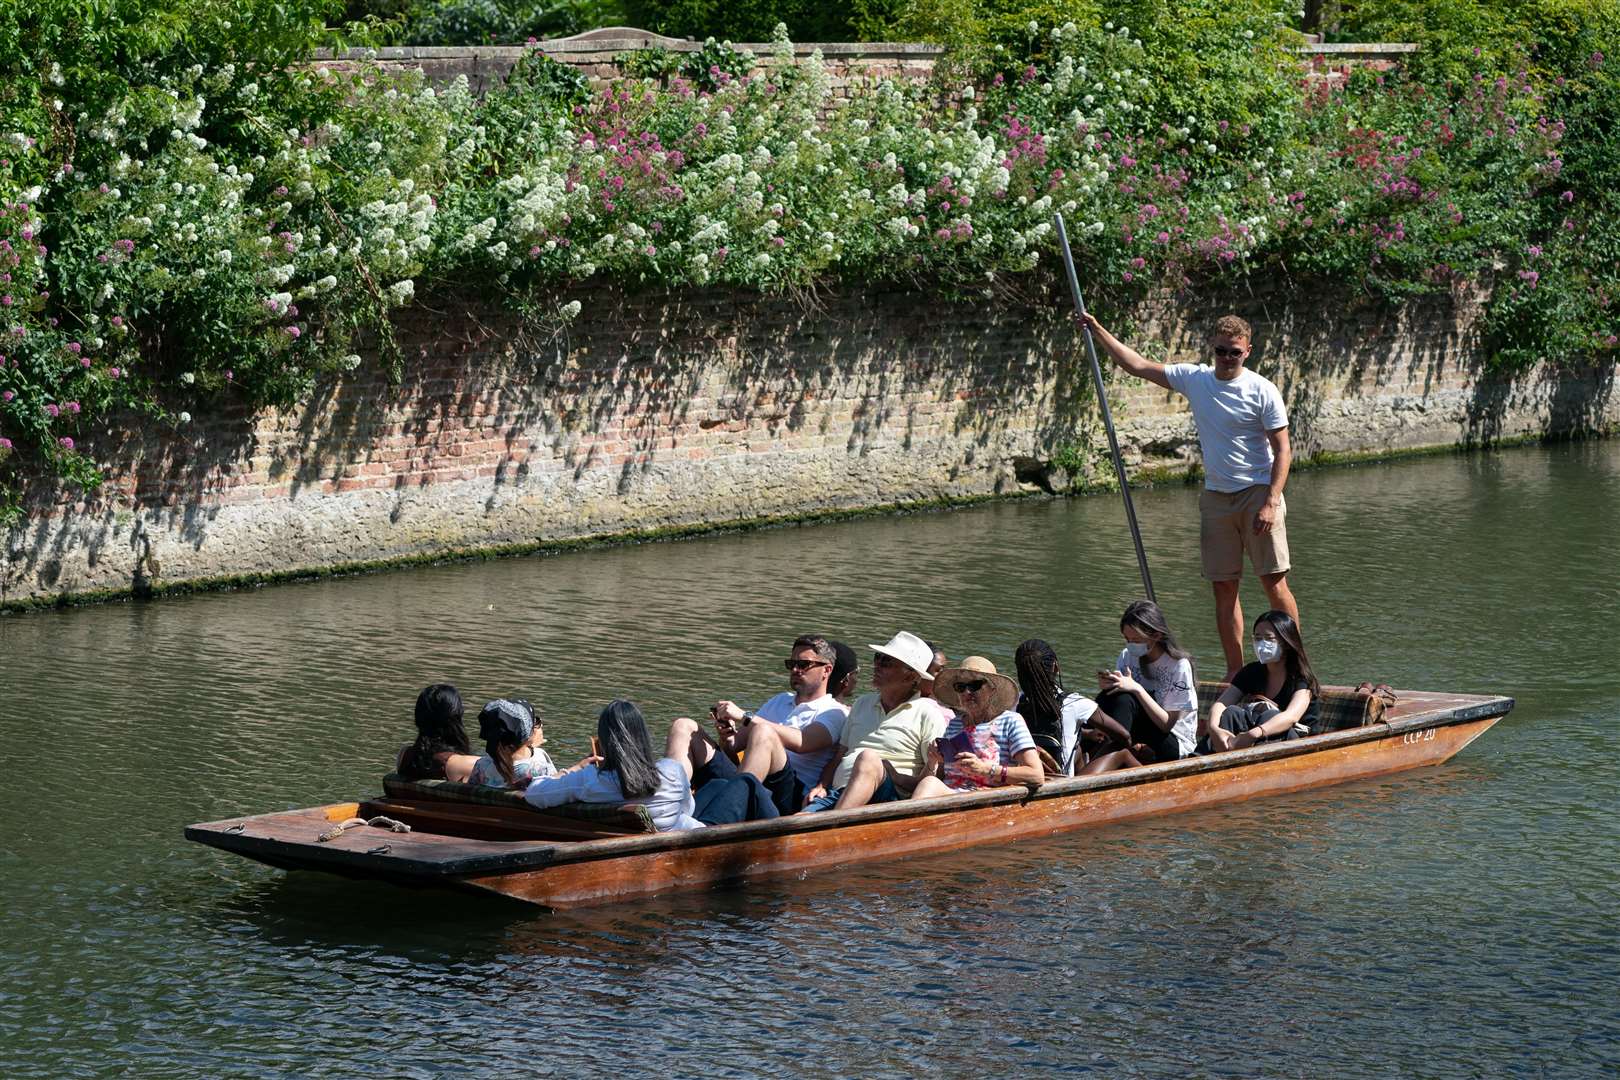 People enjoy the hot weather as they punt along the River Cam in Cambridge (Joe Giddens/PA)